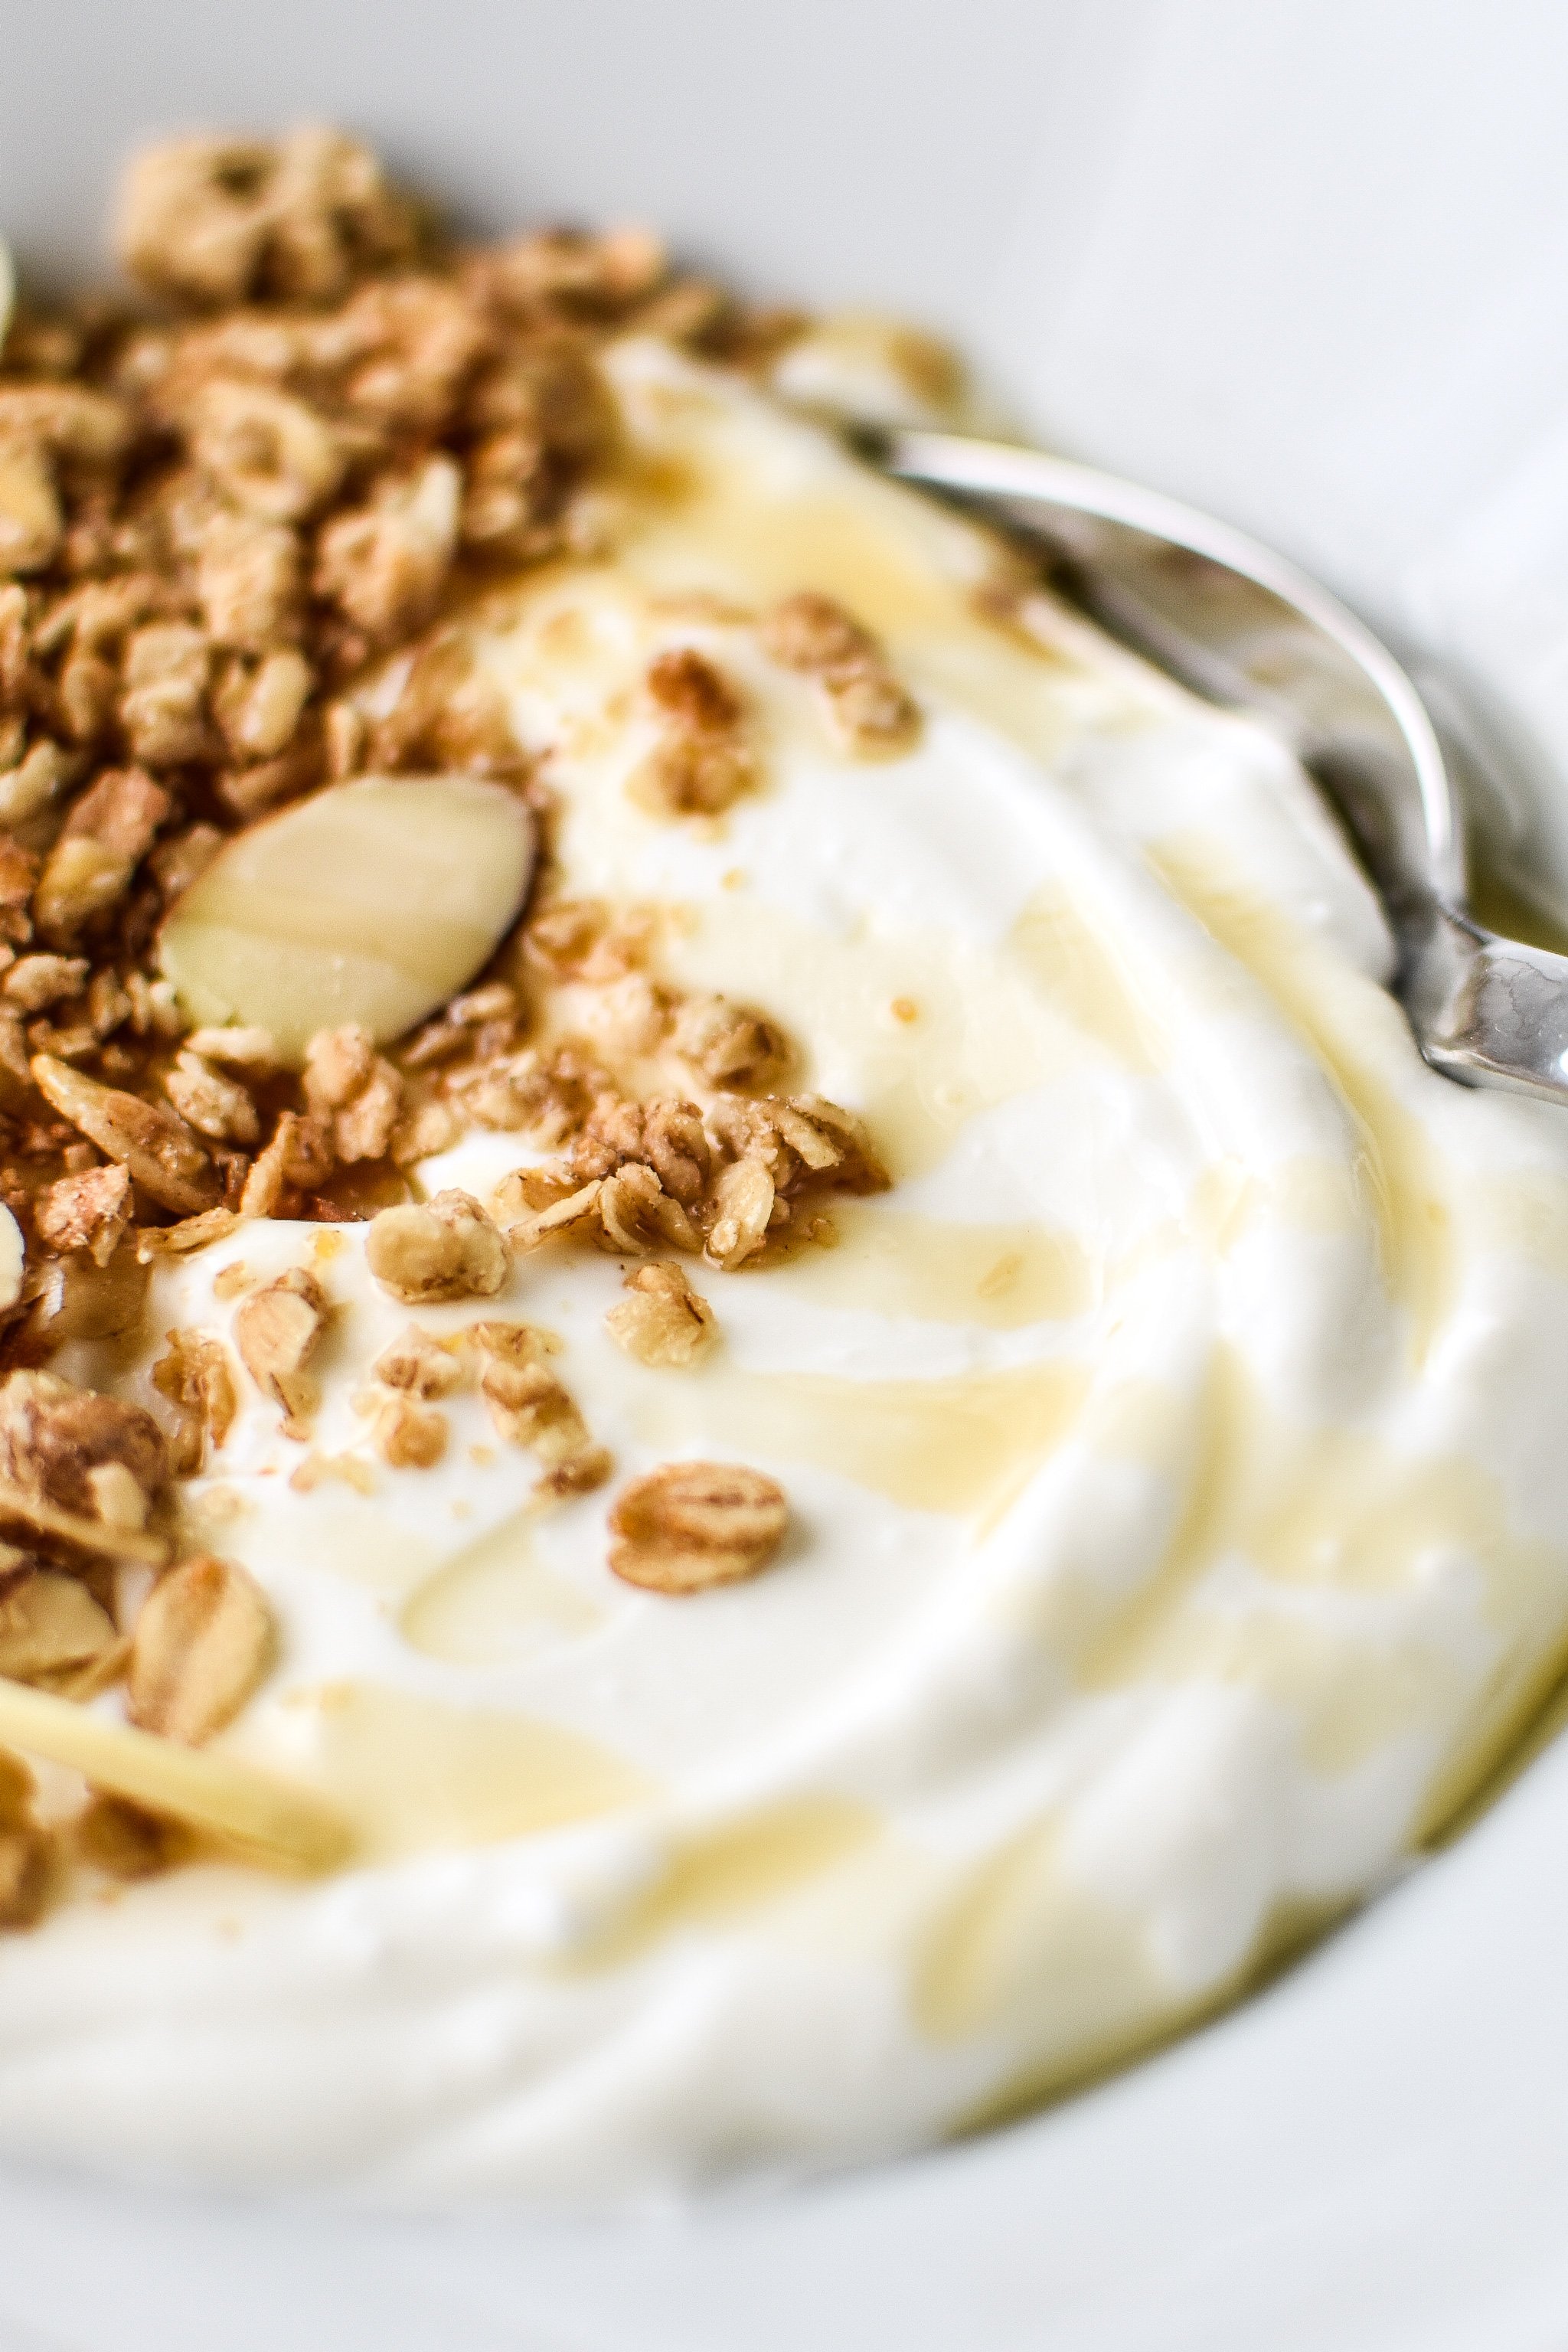 Freshly made yogurt with granola and a light maple syrup drizzle.